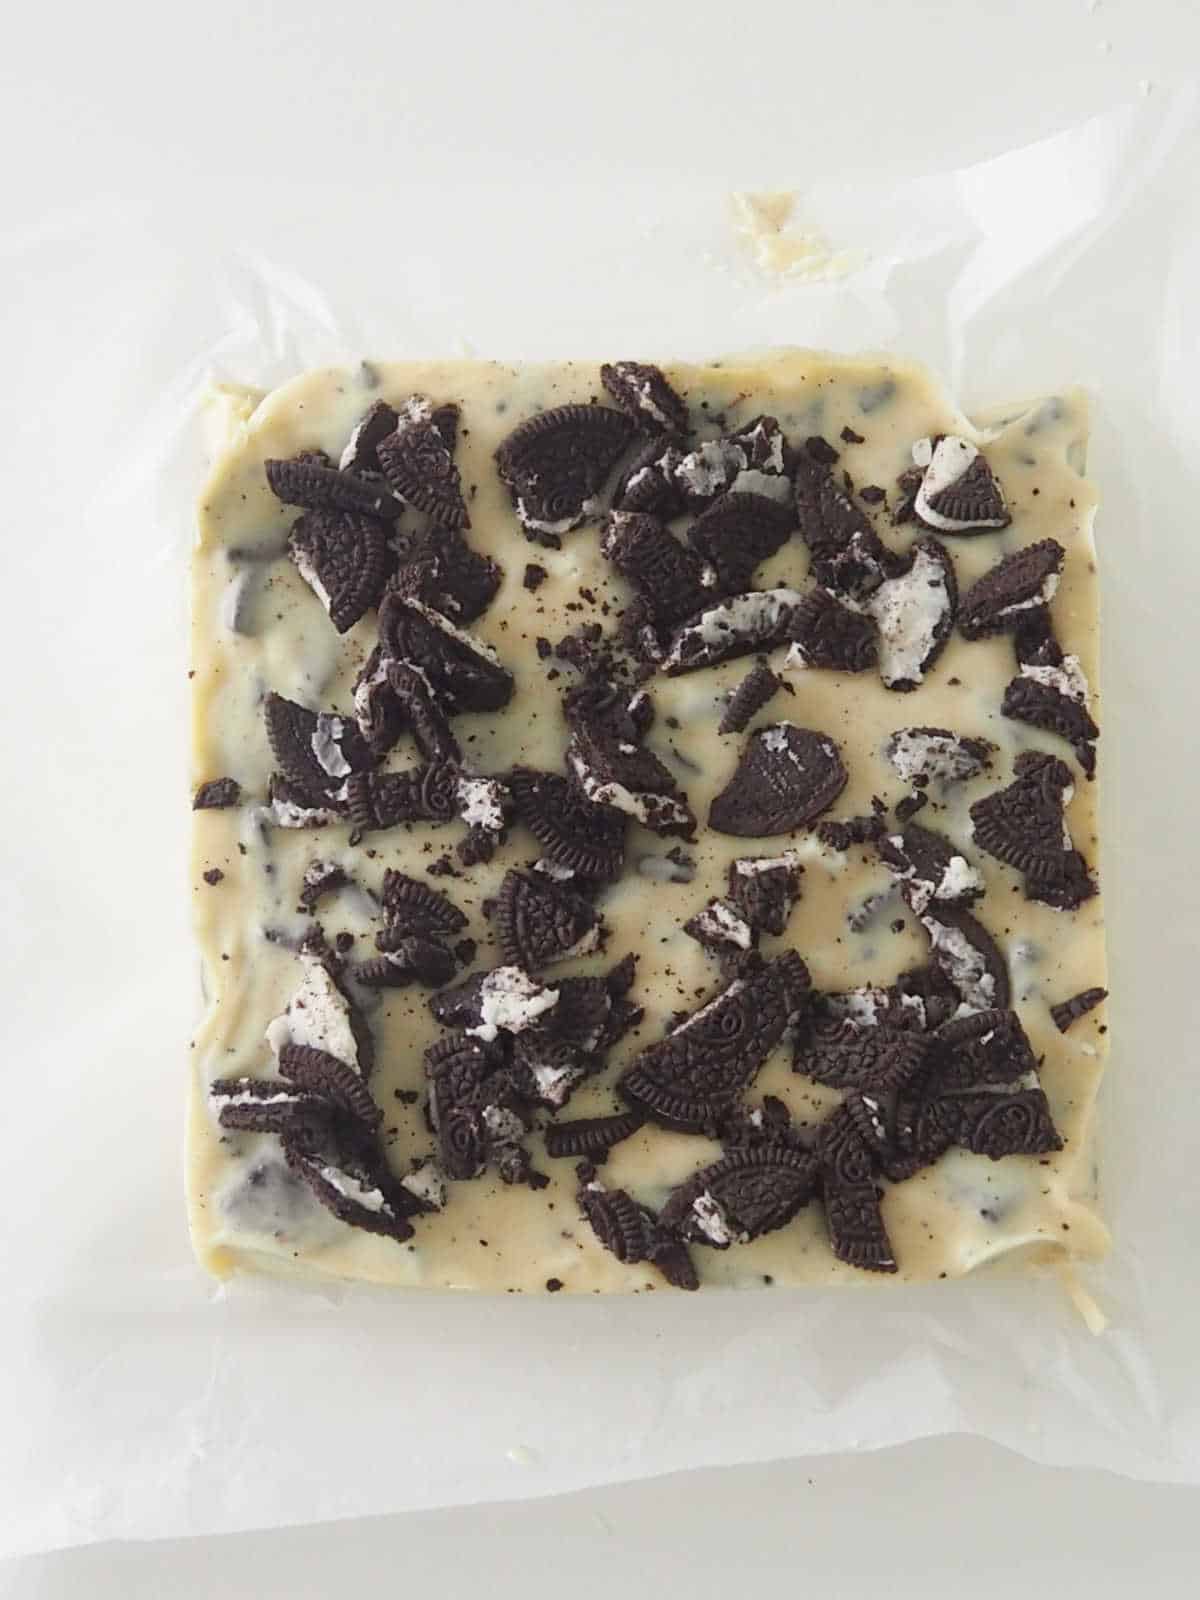 An uncut slab of white chocolate and Oreo fudge that is sitting on baking paper on top of a white bench top.